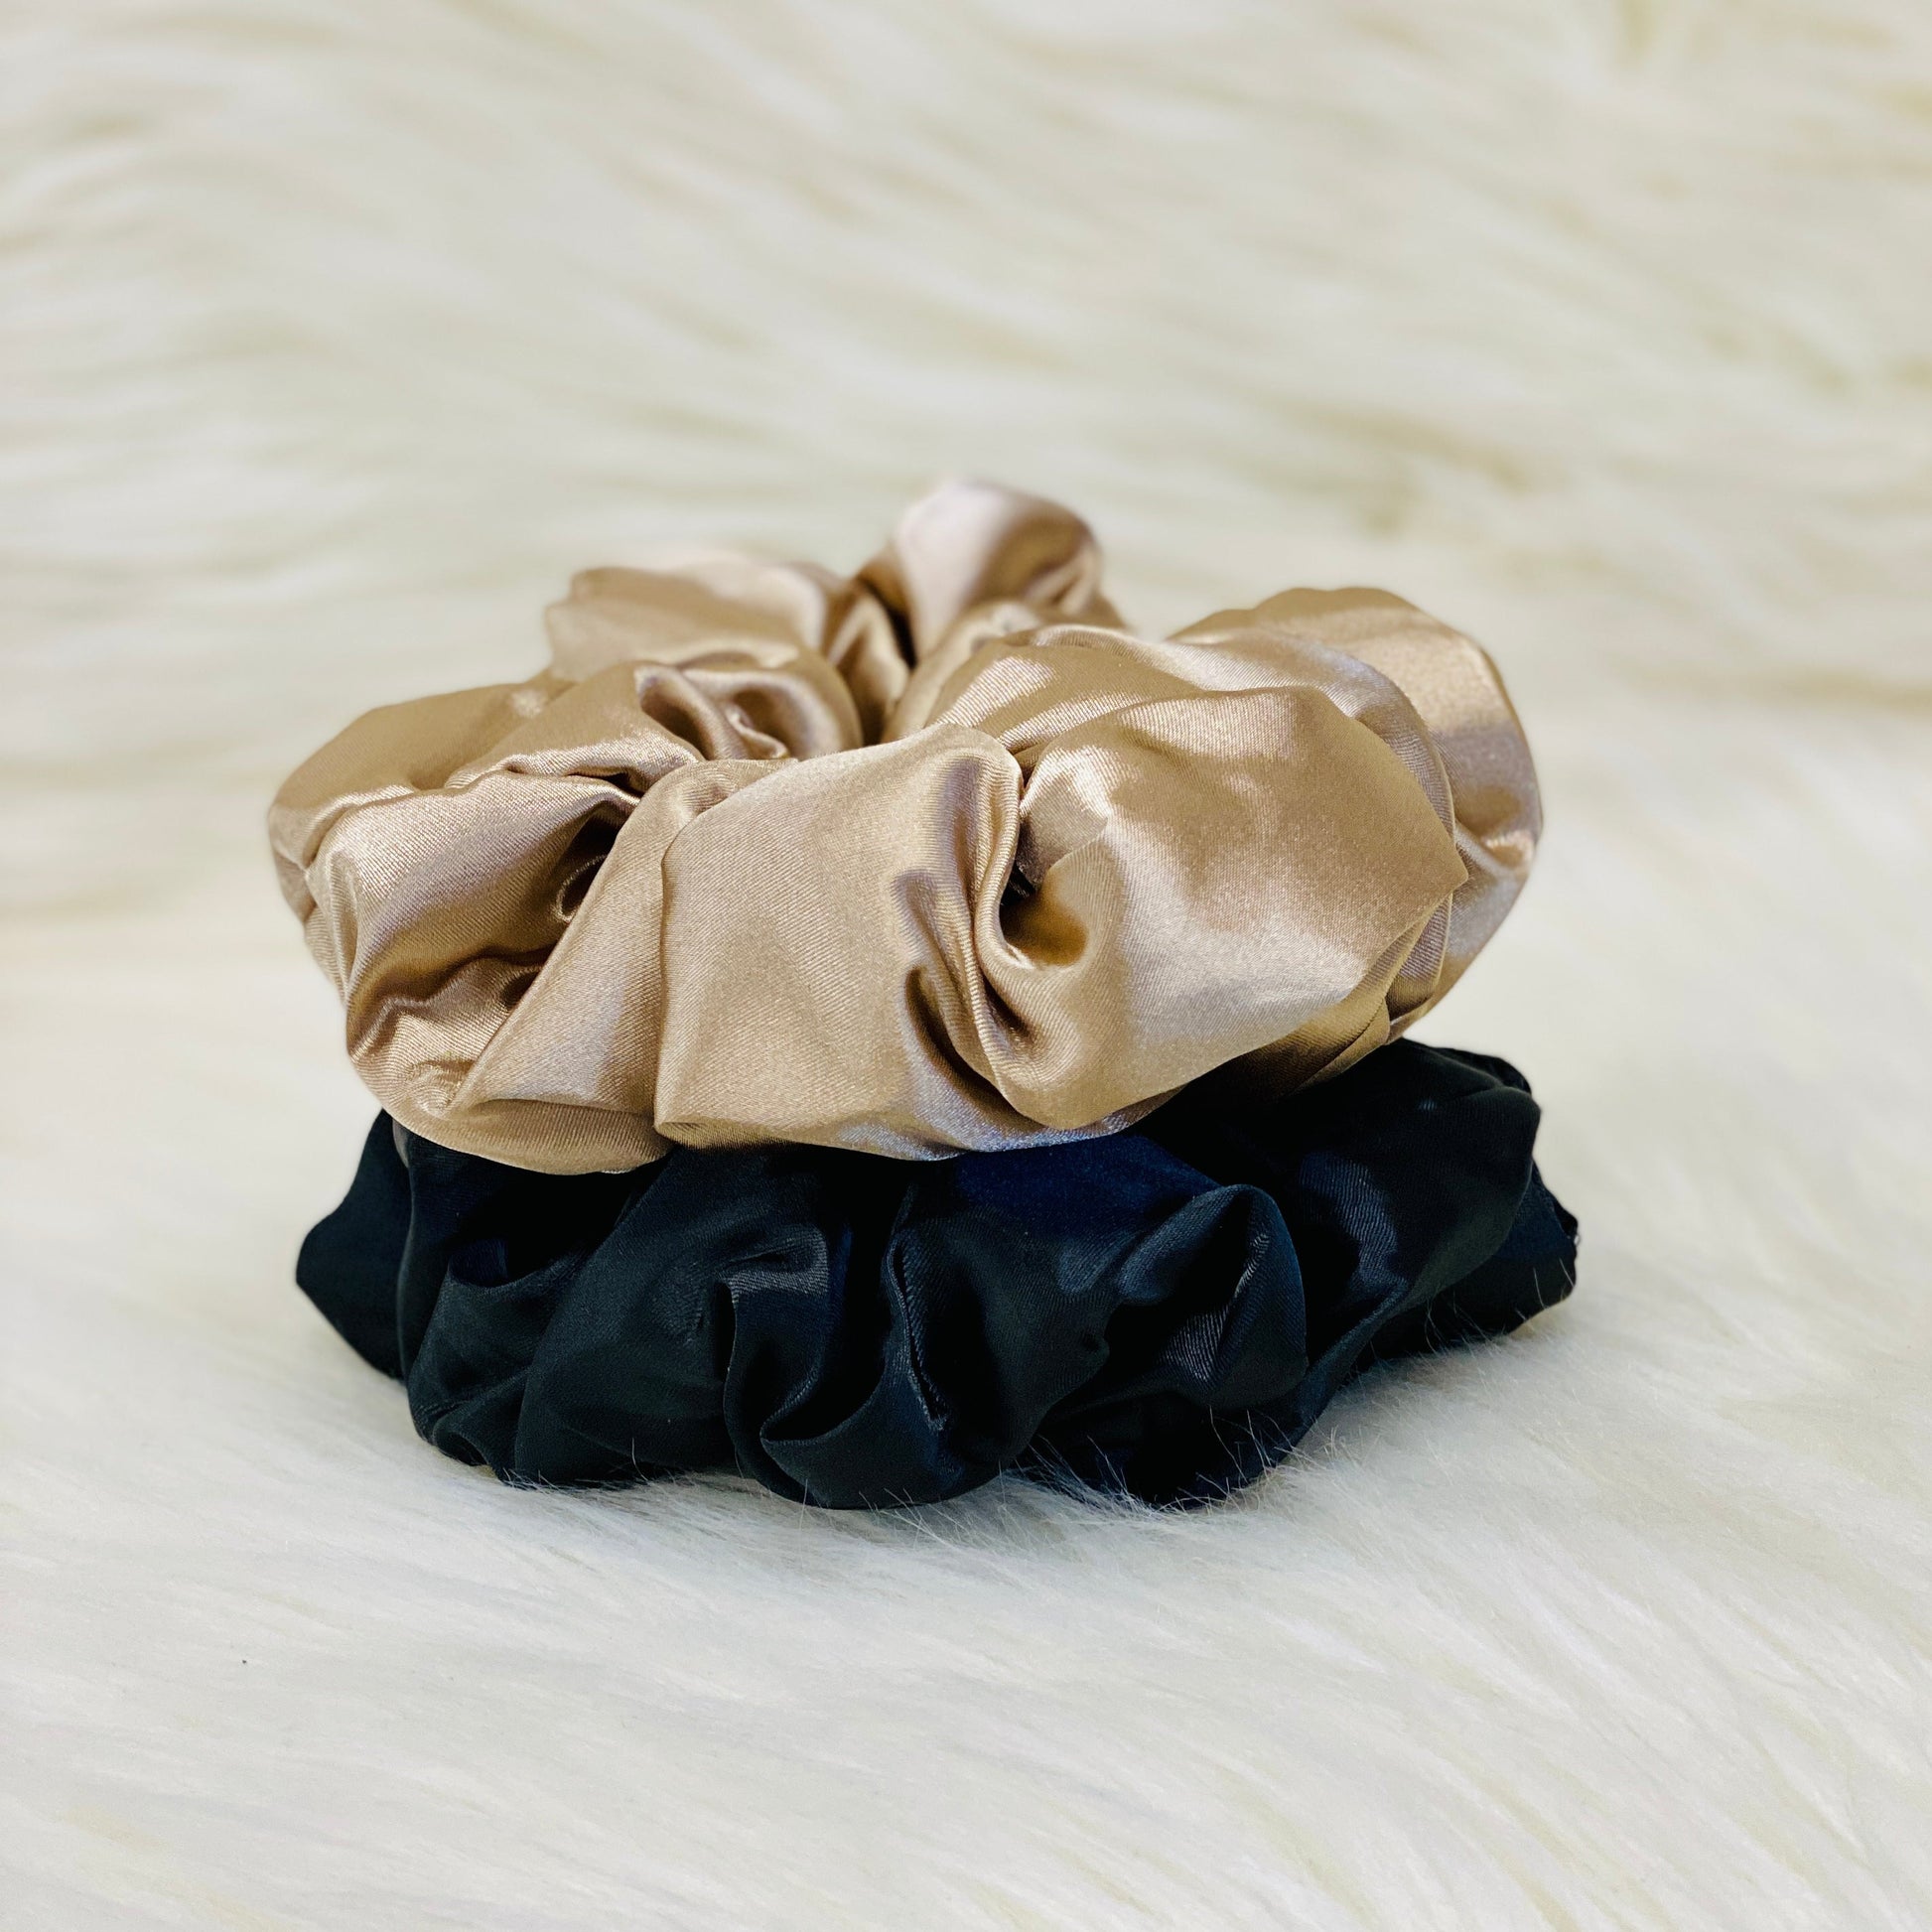 Each package includes 2 Pillow Scrunchies measuring 7 inches in diameter.